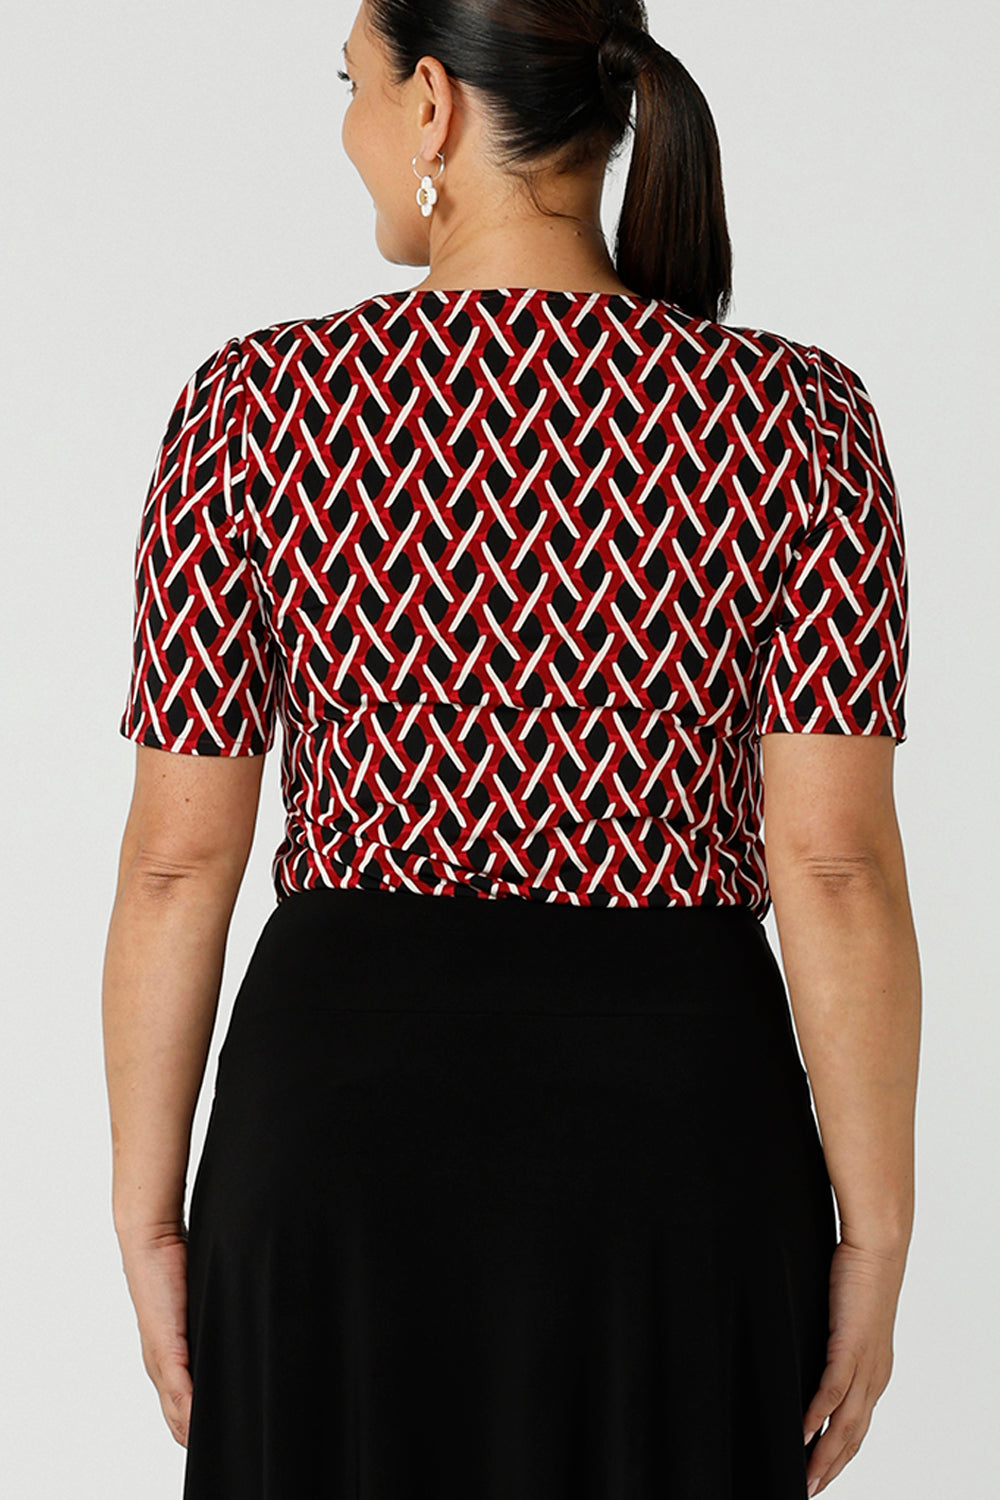 Back view a size 12 woman wears a geometric Chevron print Berni top. Corporate causal work wear top that is comfortable and versatile. Styled back with Black Indi pants. Made in Australia for women size 8 - 24.